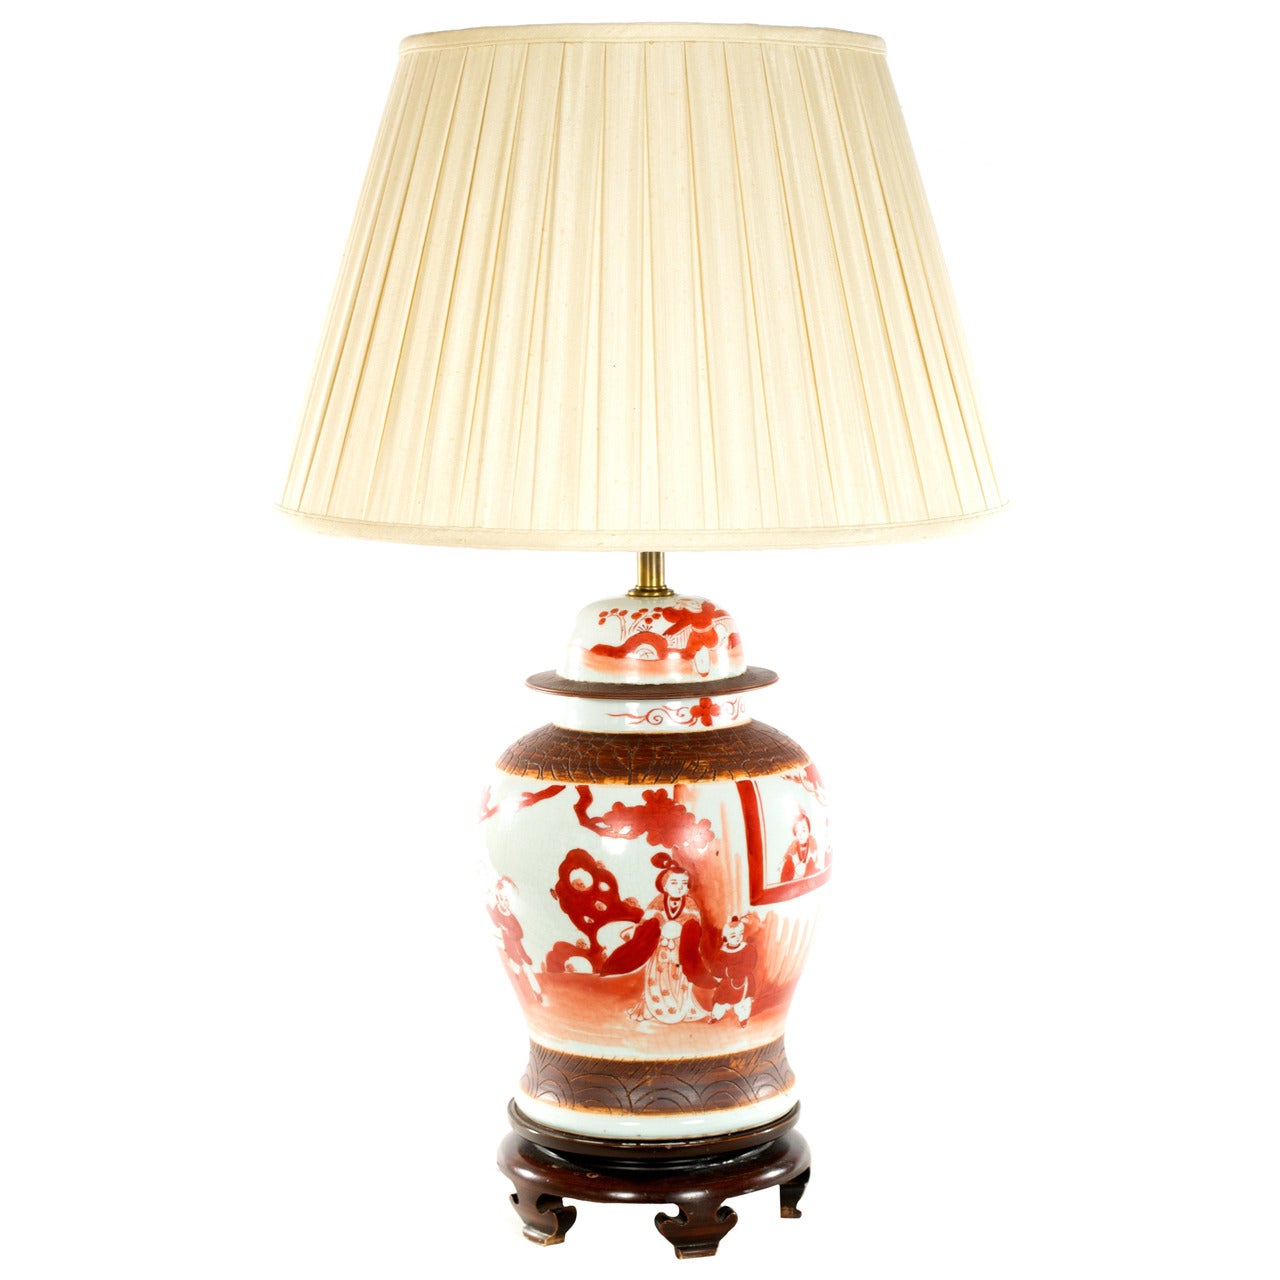 Chinese Red-Painted Baluster Vase Lamp